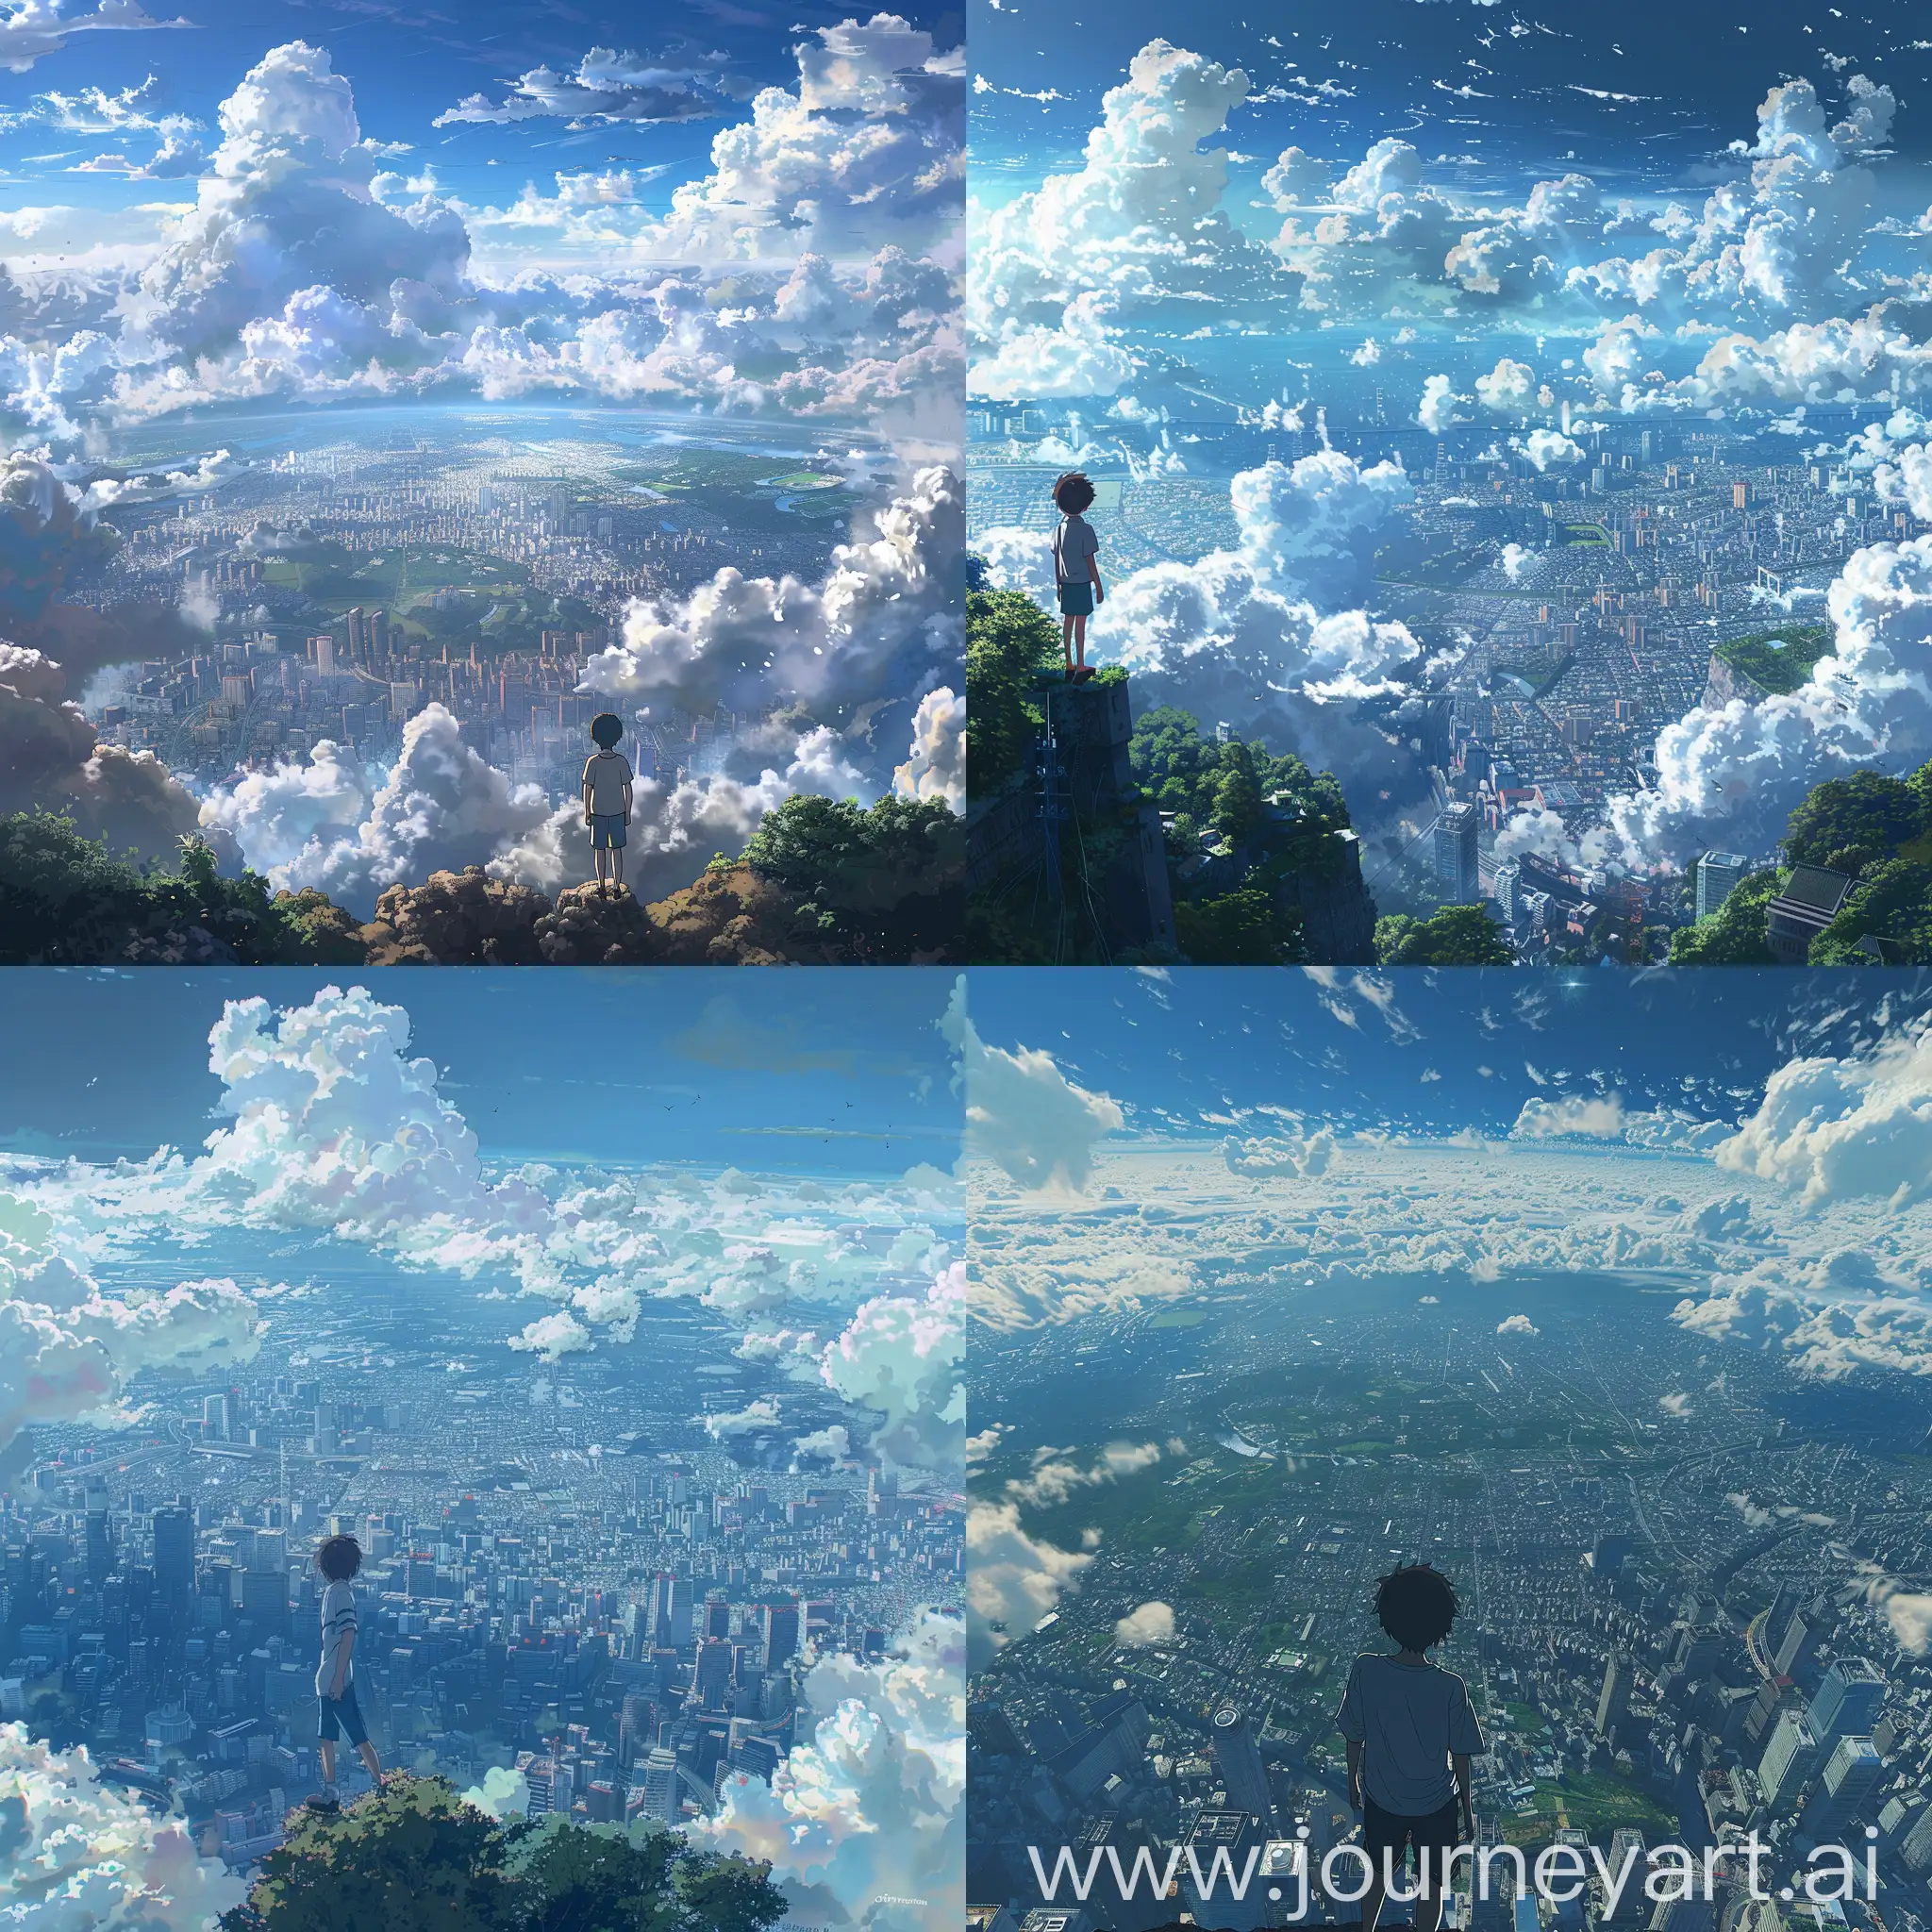 Animetic photo,beautiful anime style scenery,mokoto shinkai style,beautiful sky,a boy in sky looking over a detailed aerial and large  view of Tokyo city,summers,clouds,wonders,no hyperrealistic,avoid bad and distorted view of the boy.  -- 9:17